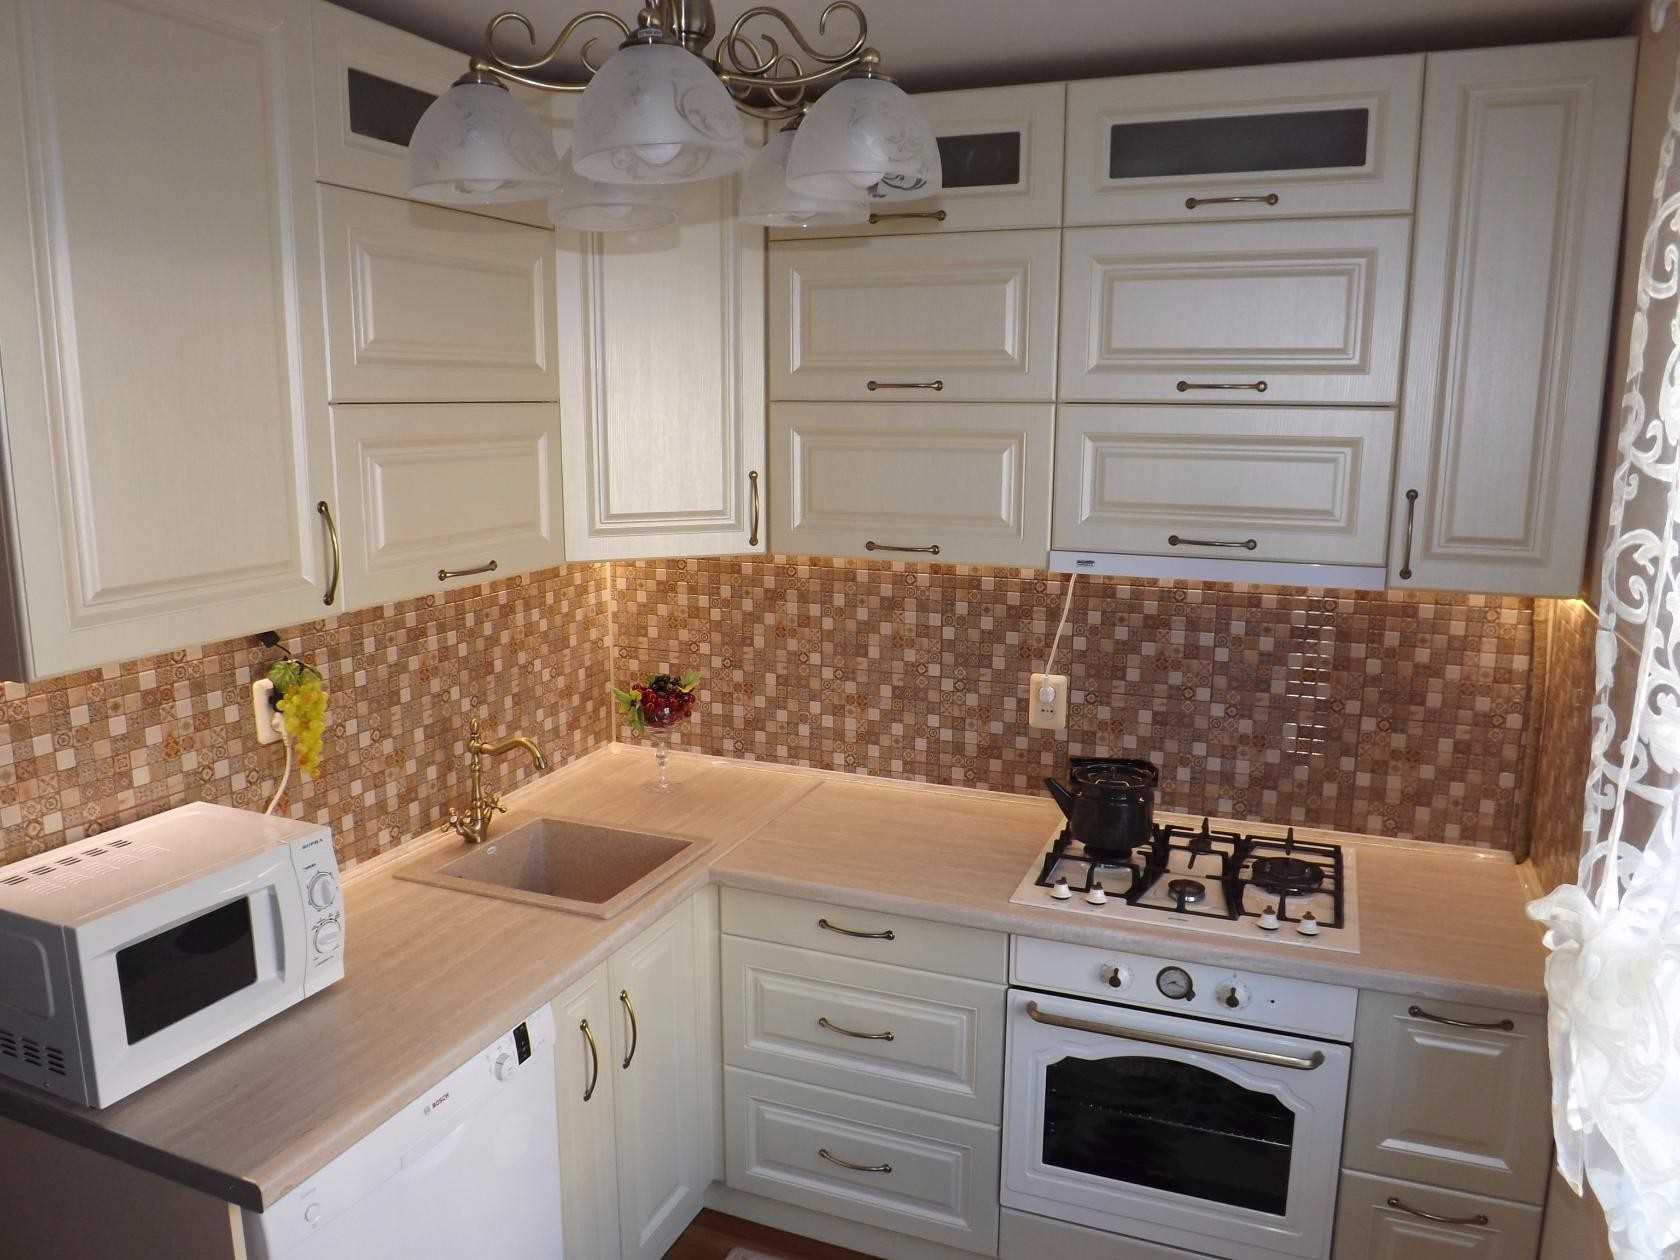 an example of a bright kitchen interior of 14 sq.m